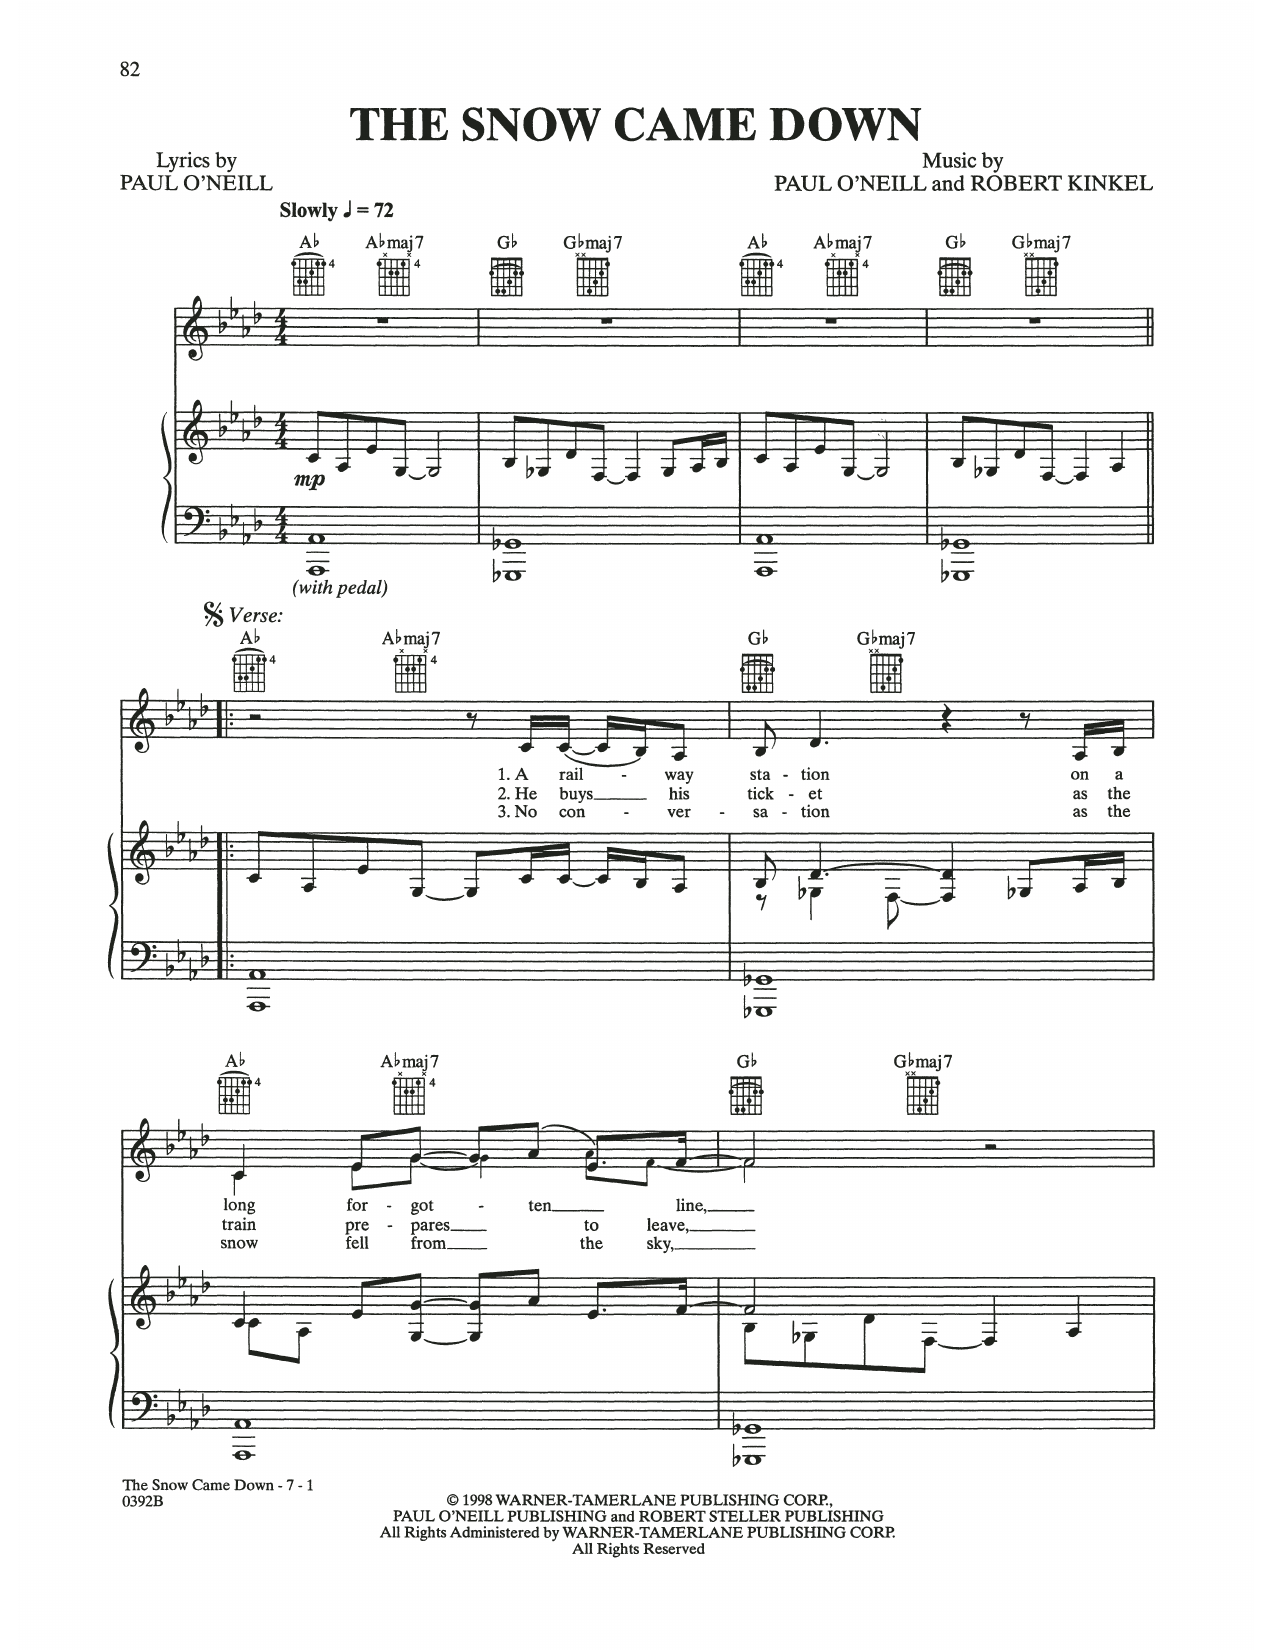 Download Trans-Siberian Orchestra The Snow Came Down Sheet Music